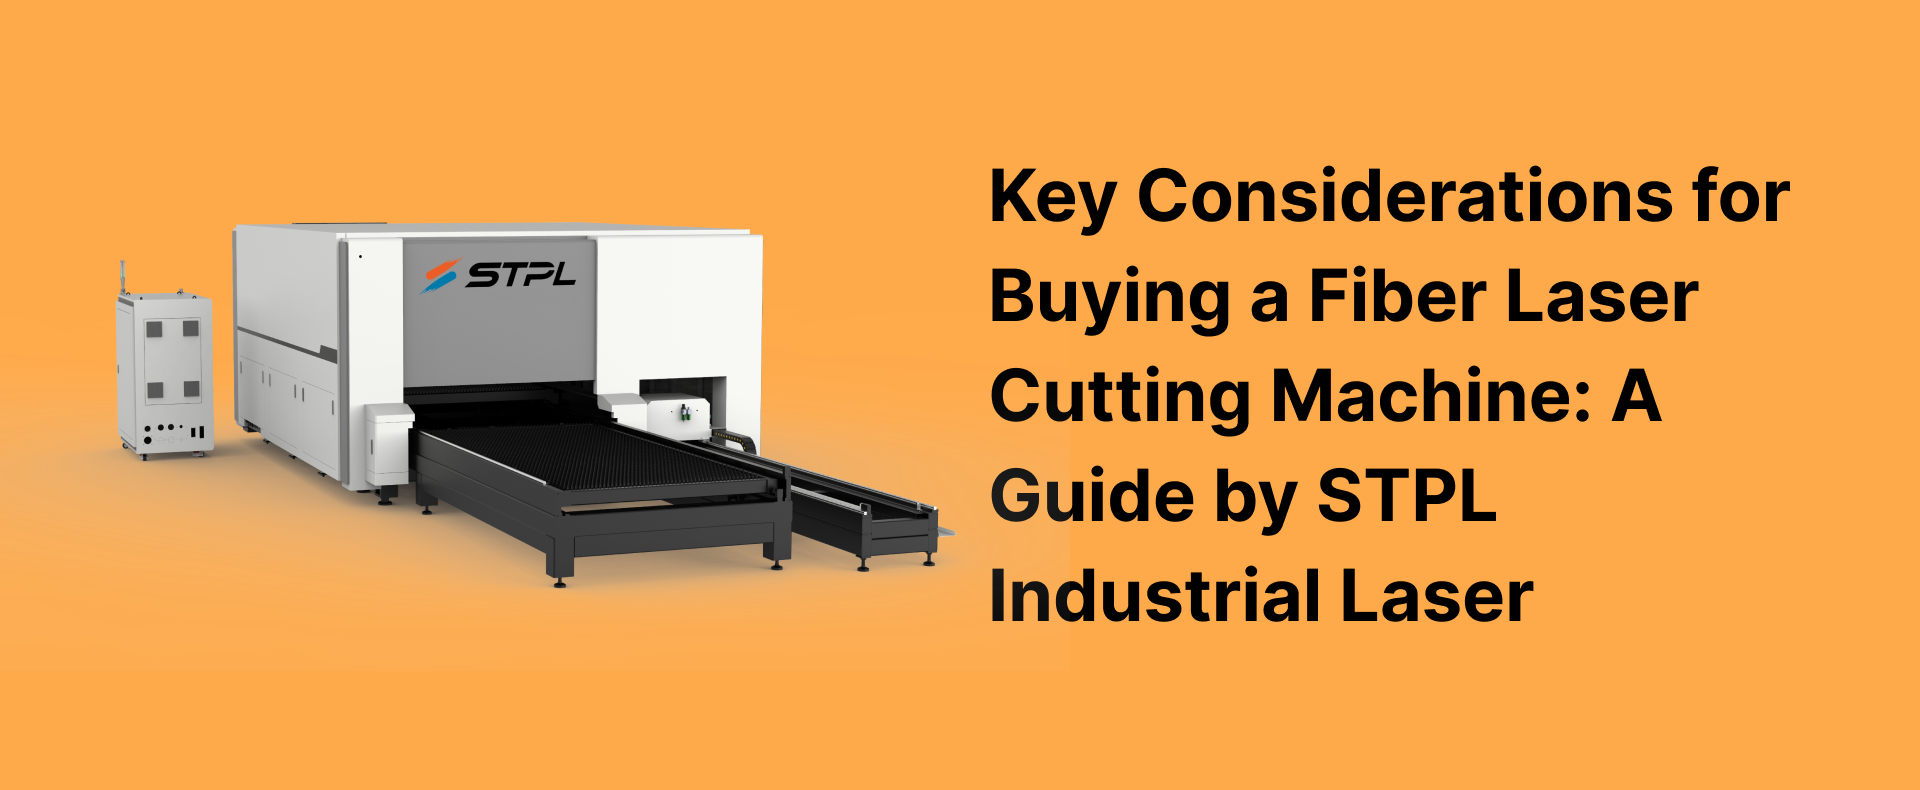 Key Considerations for Buying a Fiber Laser Cutting Machine: A Guide by STPL Industrial Laser